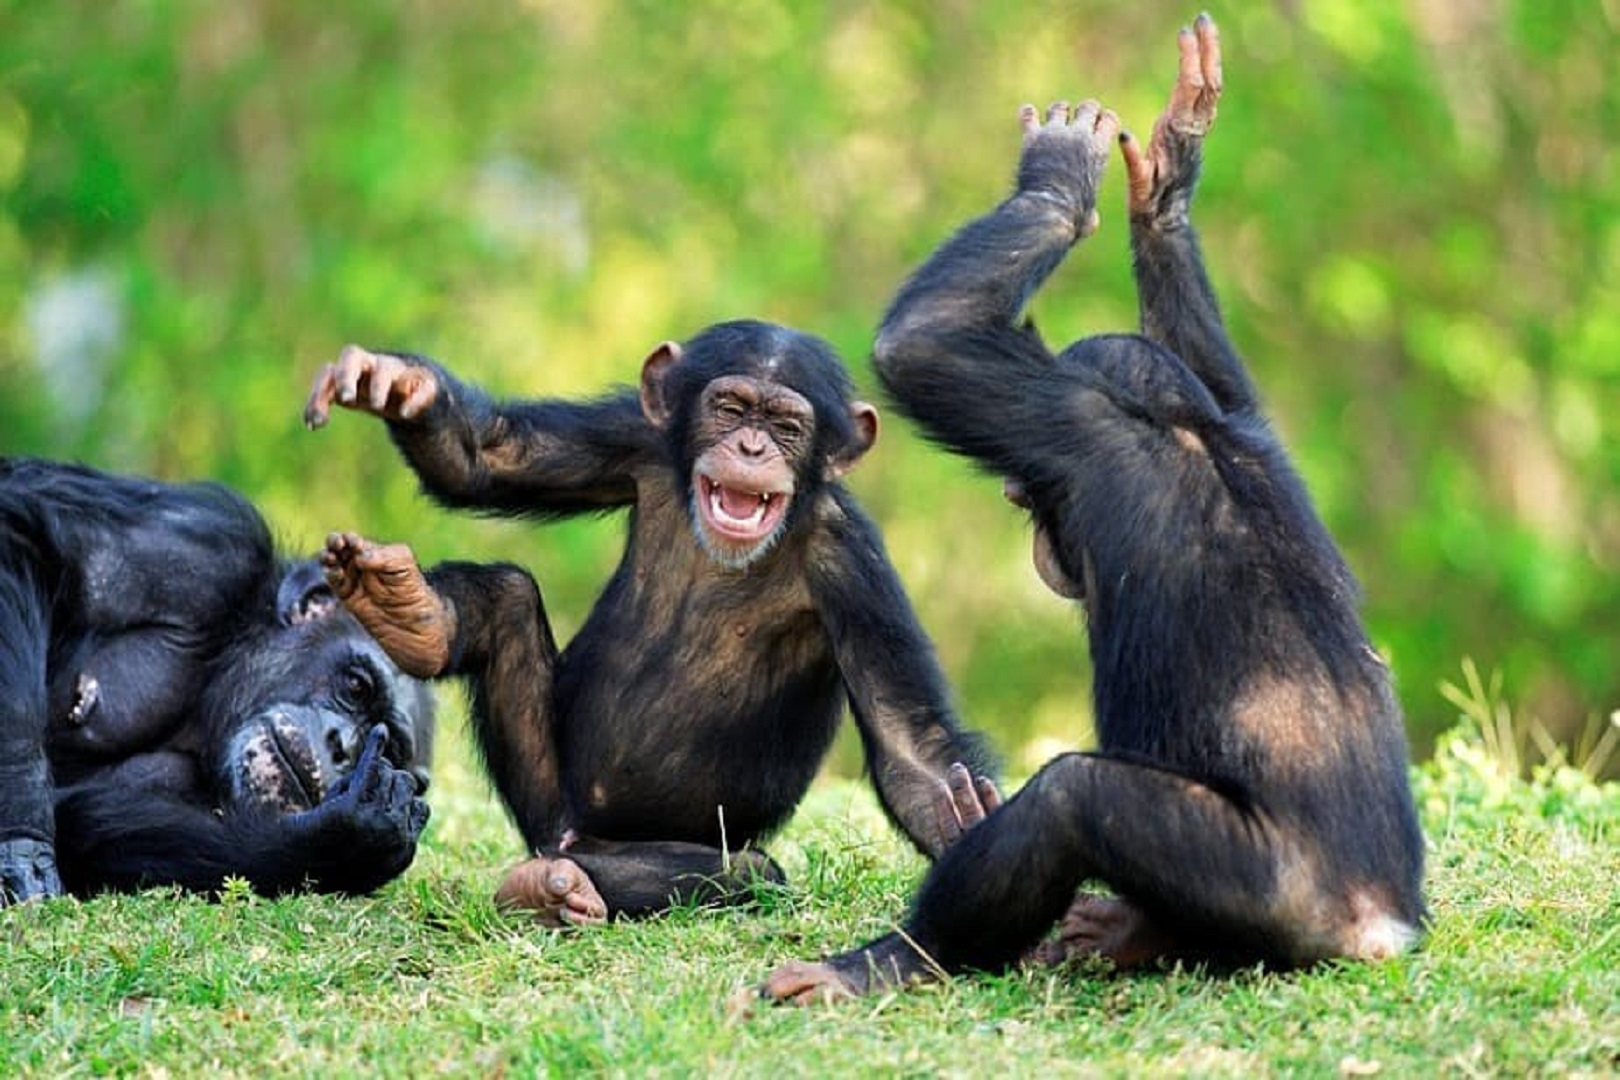 Playful moments for chimpanzees